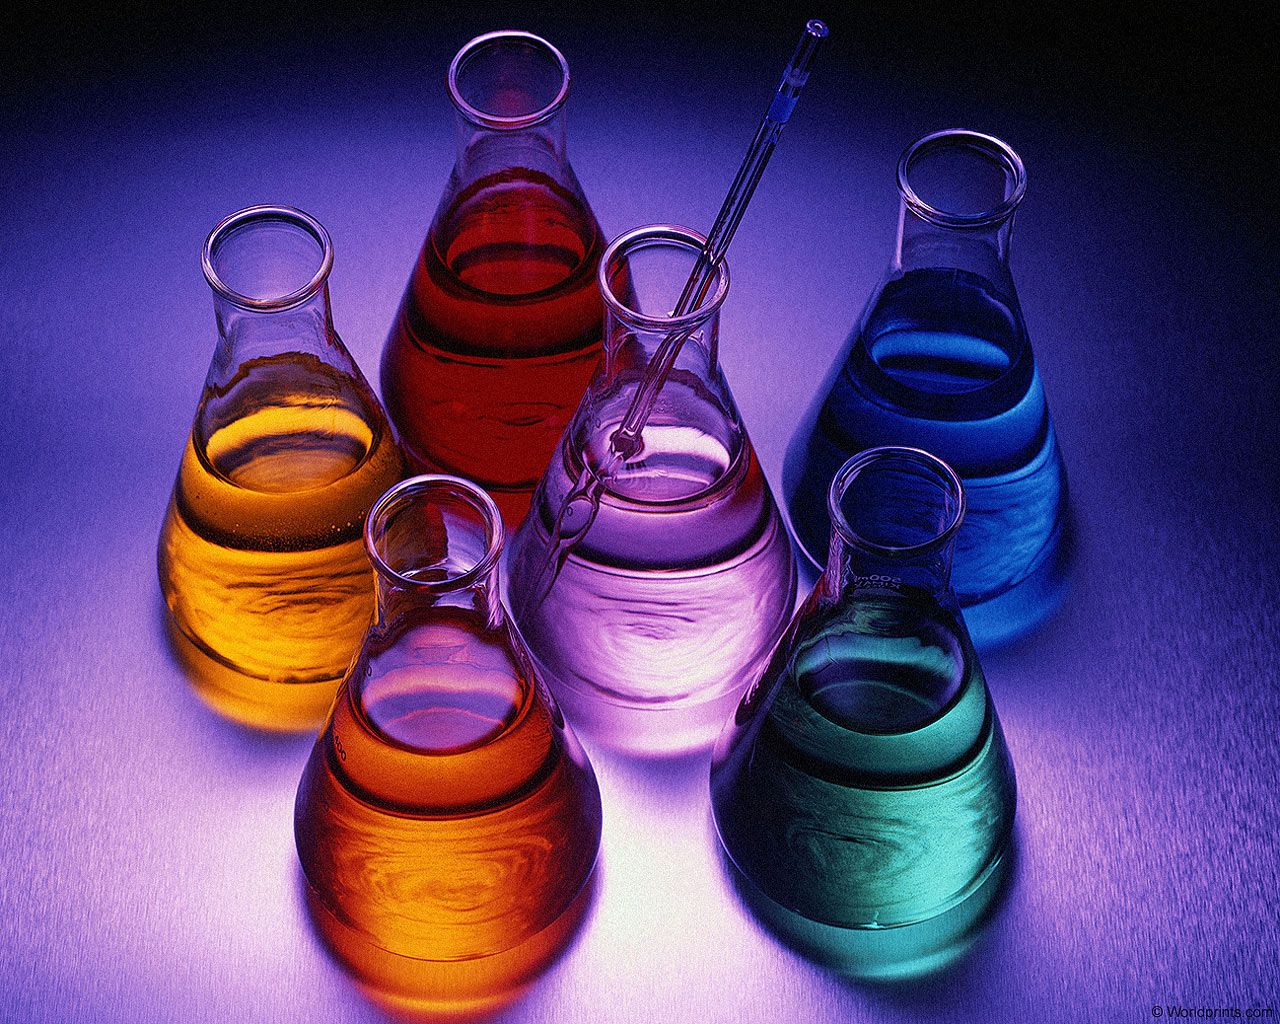 Analytical Chemistry Wallpaper. Analytical Background, Analytical Chemistry Wallpaper and Analytical Achromatic Background